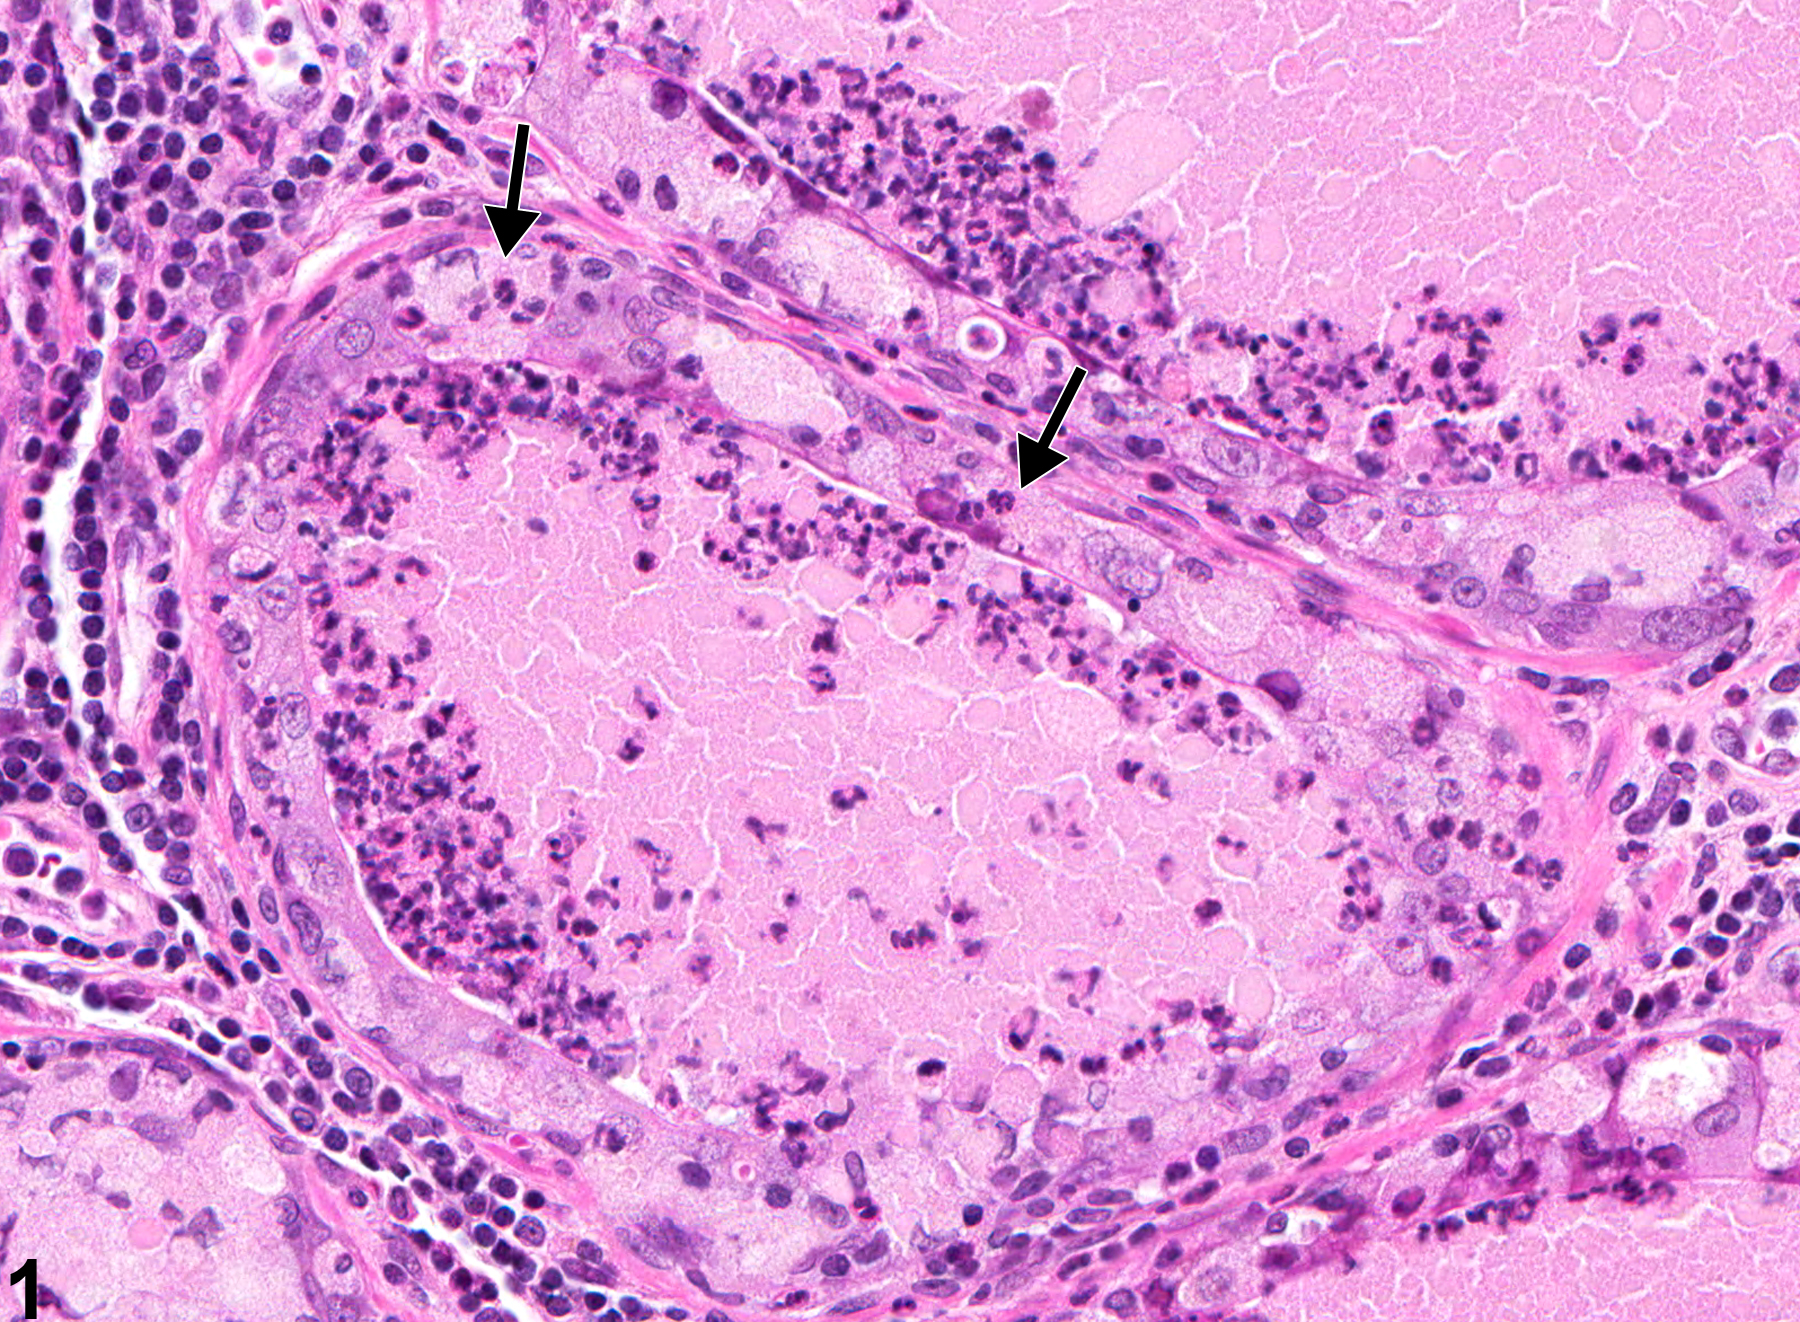 Image of inflammation in the prostate from a male F344/N rat in a chronic study